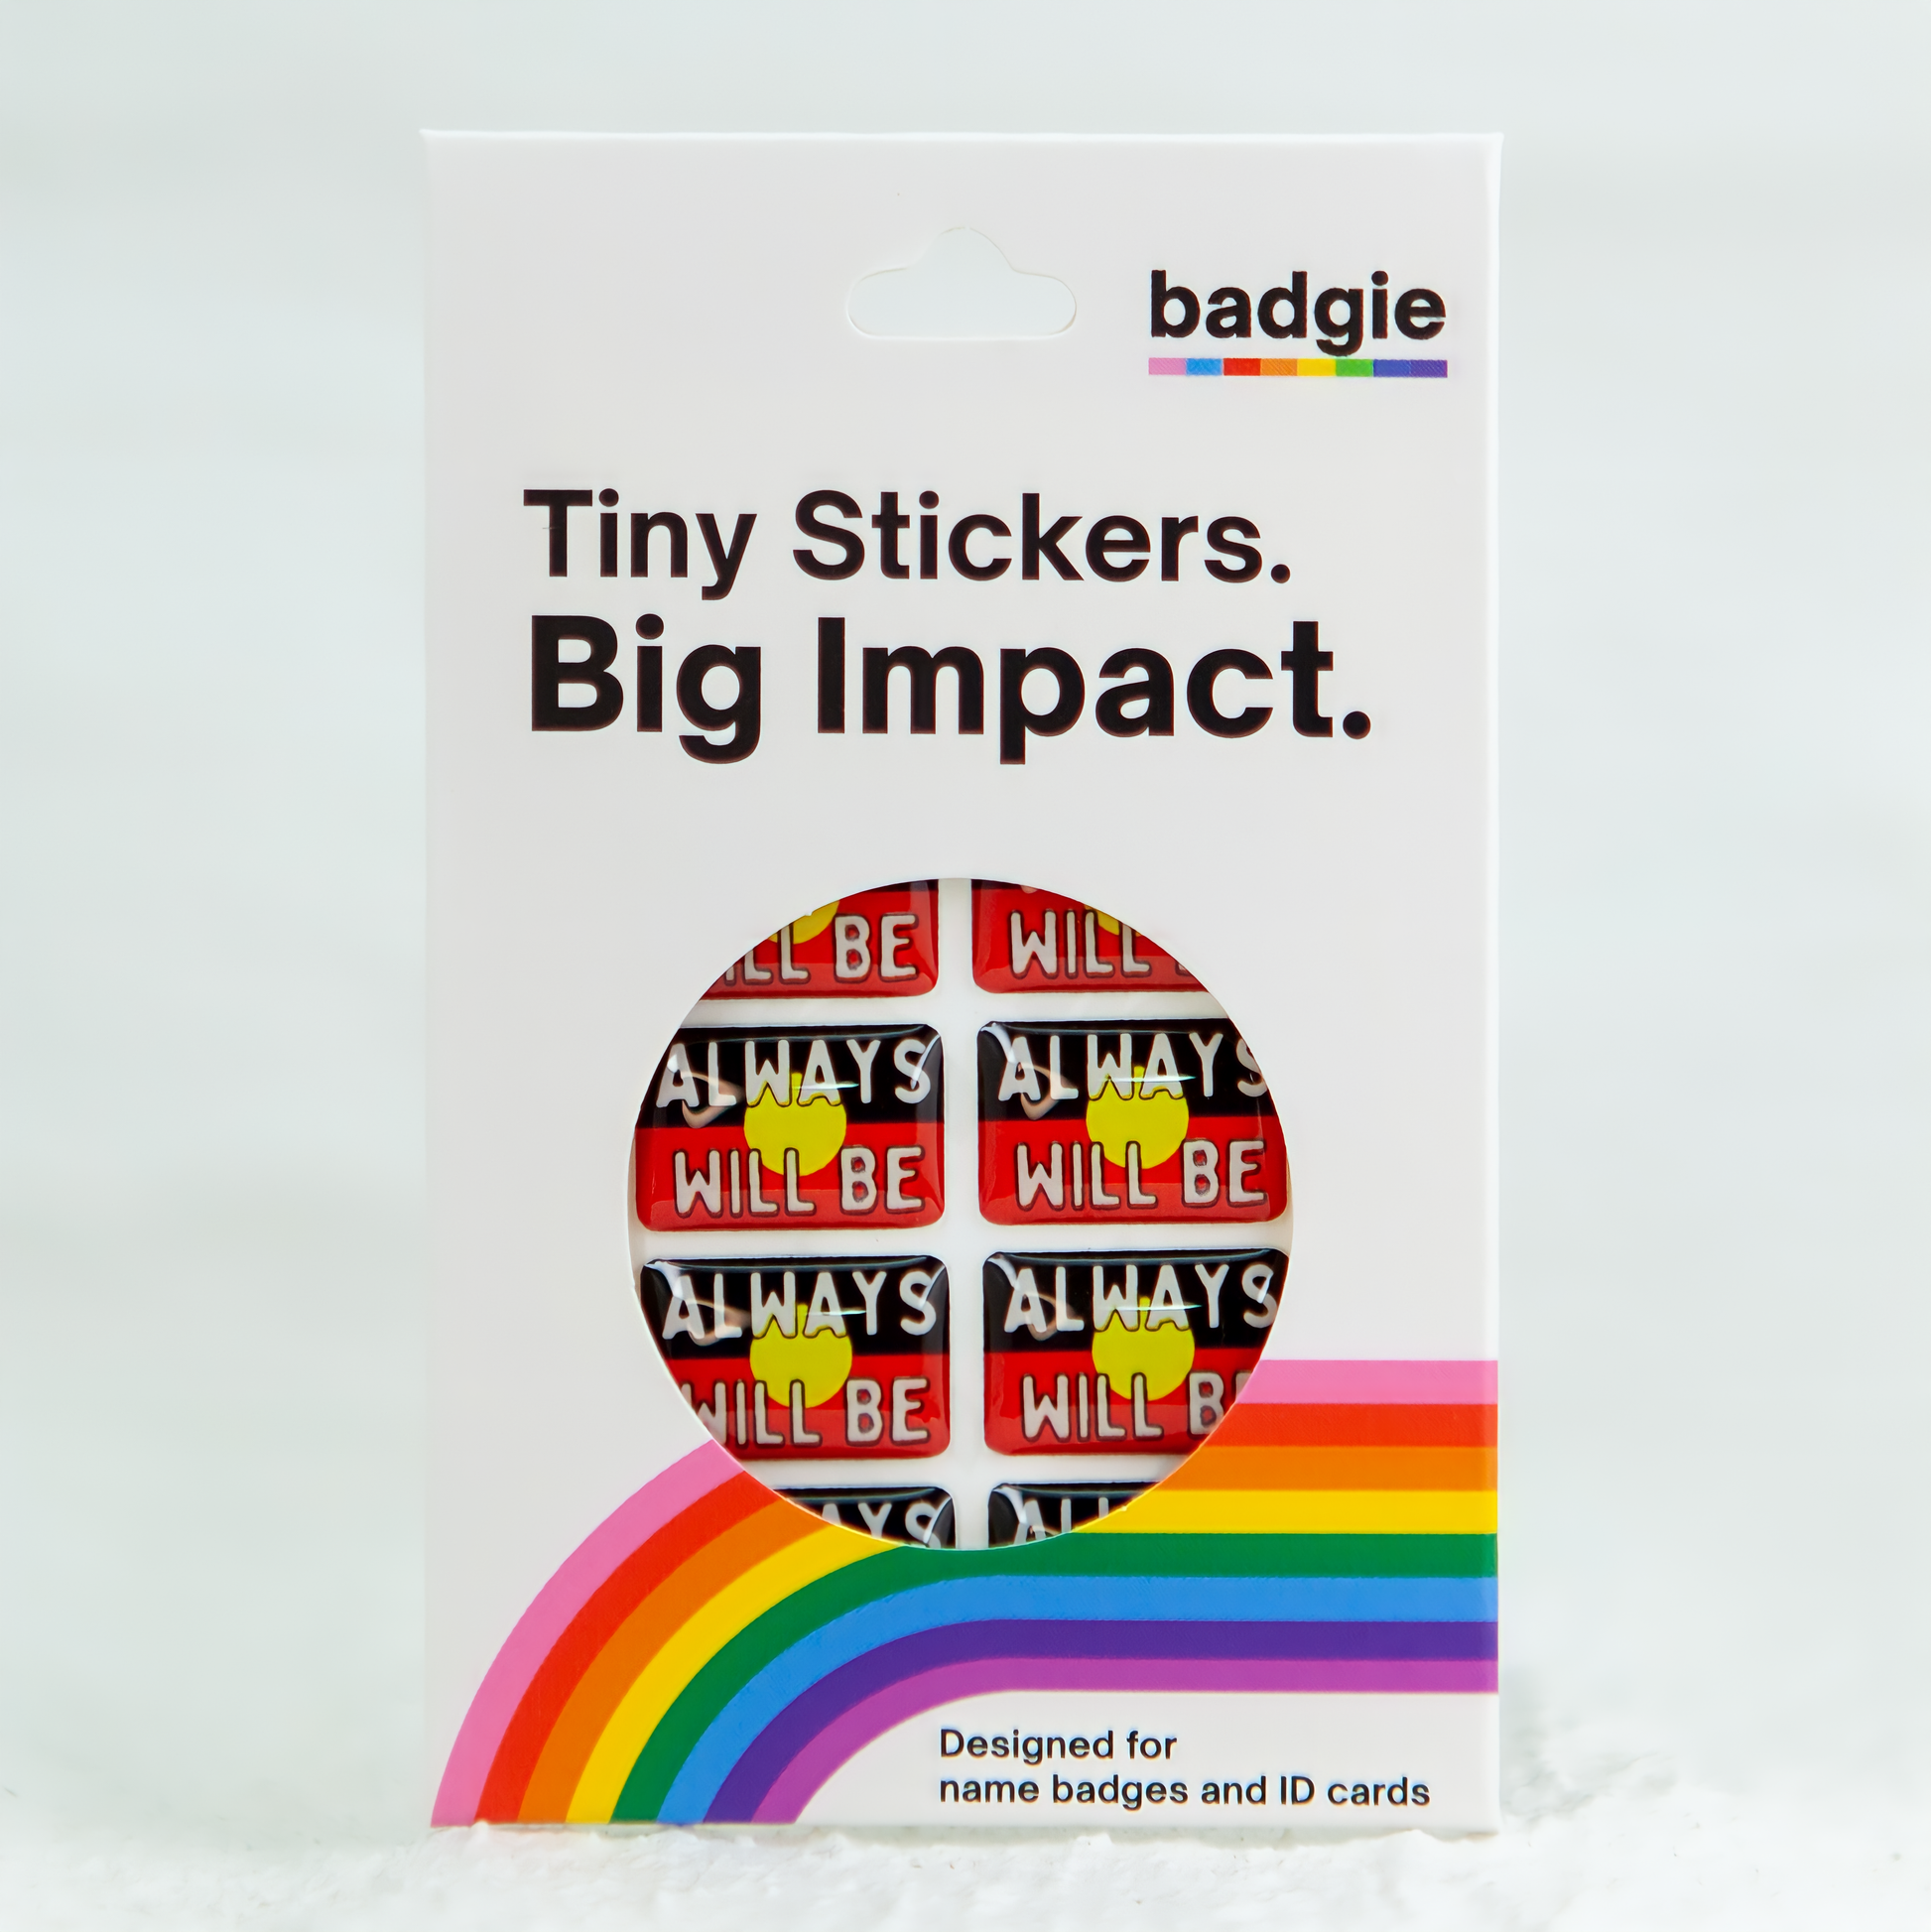 Badgie Always Will Be Aboriginal Land Sticker 8 Pack in the Packaging - Small, durable epoxy resin sticker with bright colors, designed for name badges and ID tags to support Aboriginal and Torres Strait Islander peoples.